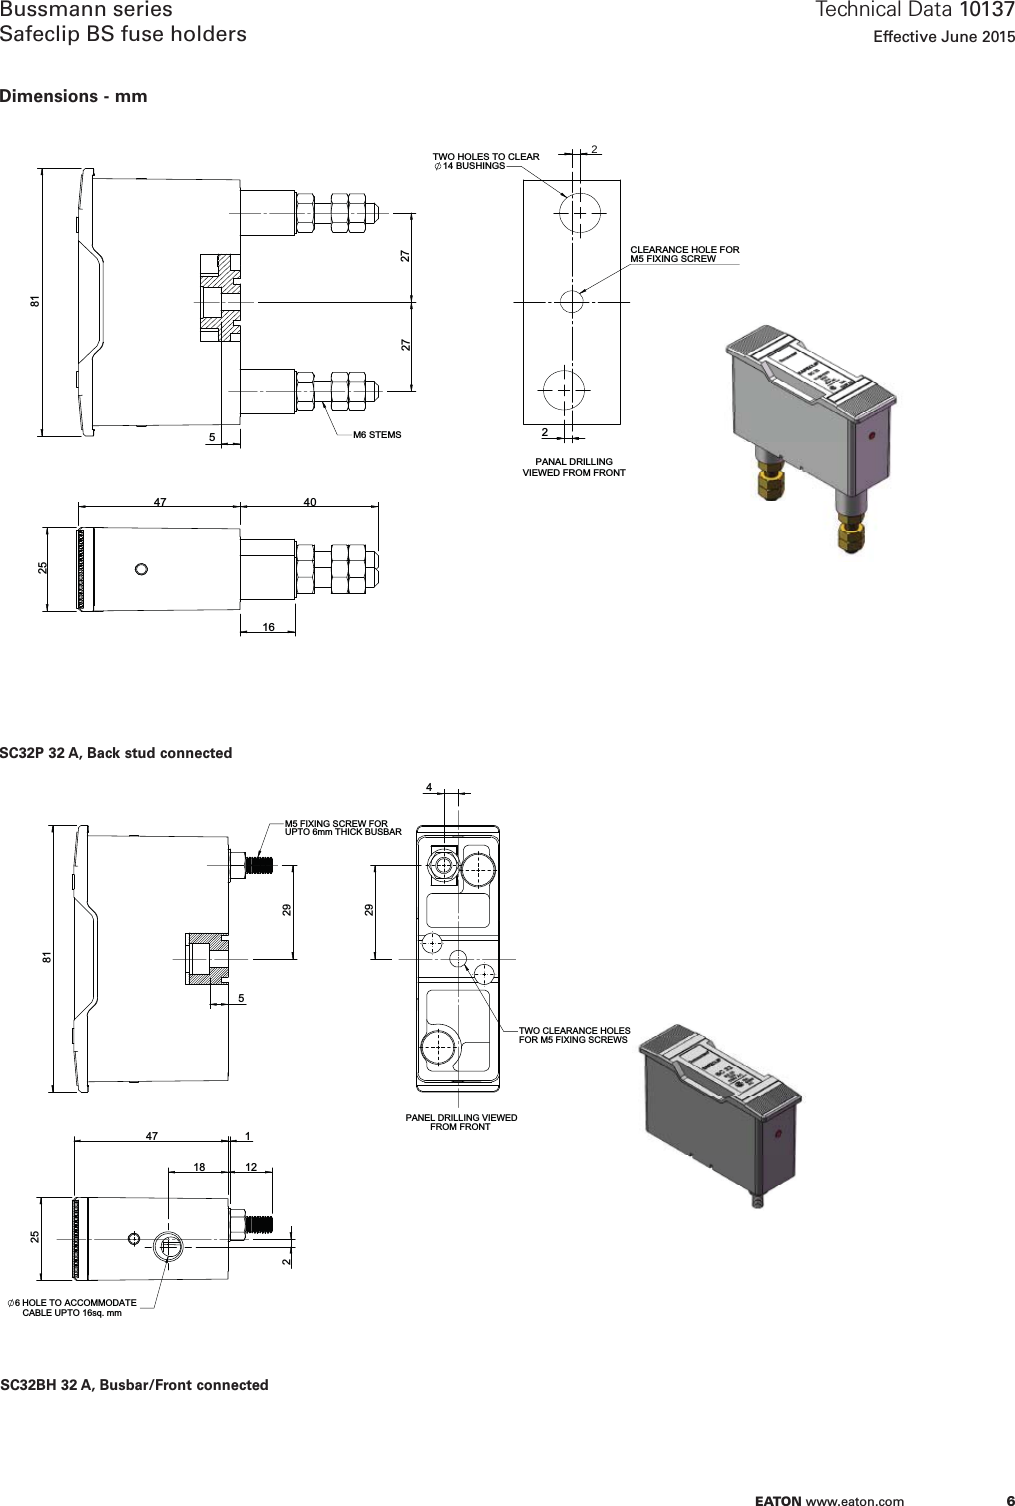 Page 6 of 10 - Bus-iec-ds-10137-safeclipfuseholders  Brochure